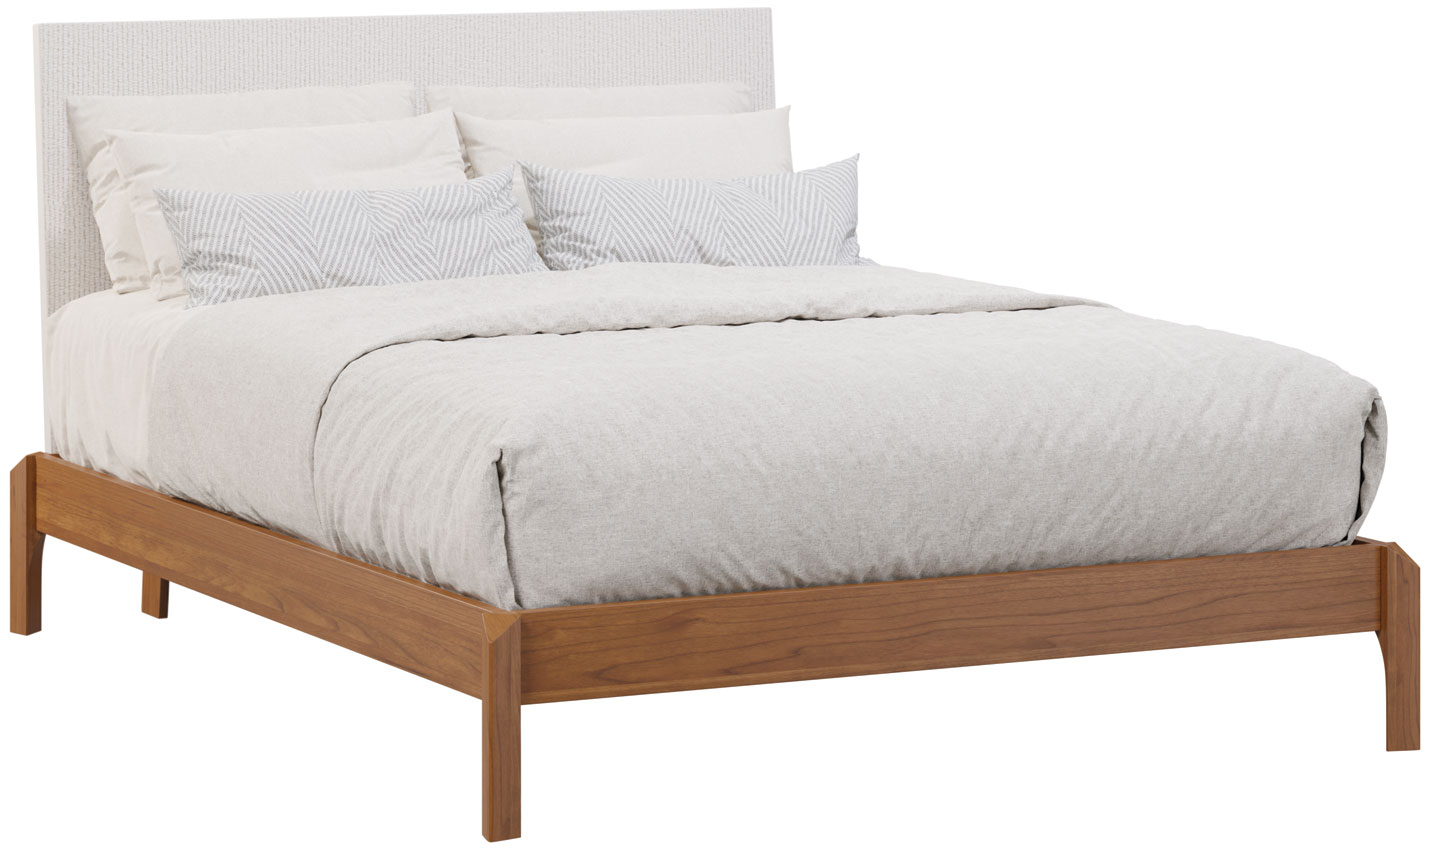 Raleigh Upholstered Bed